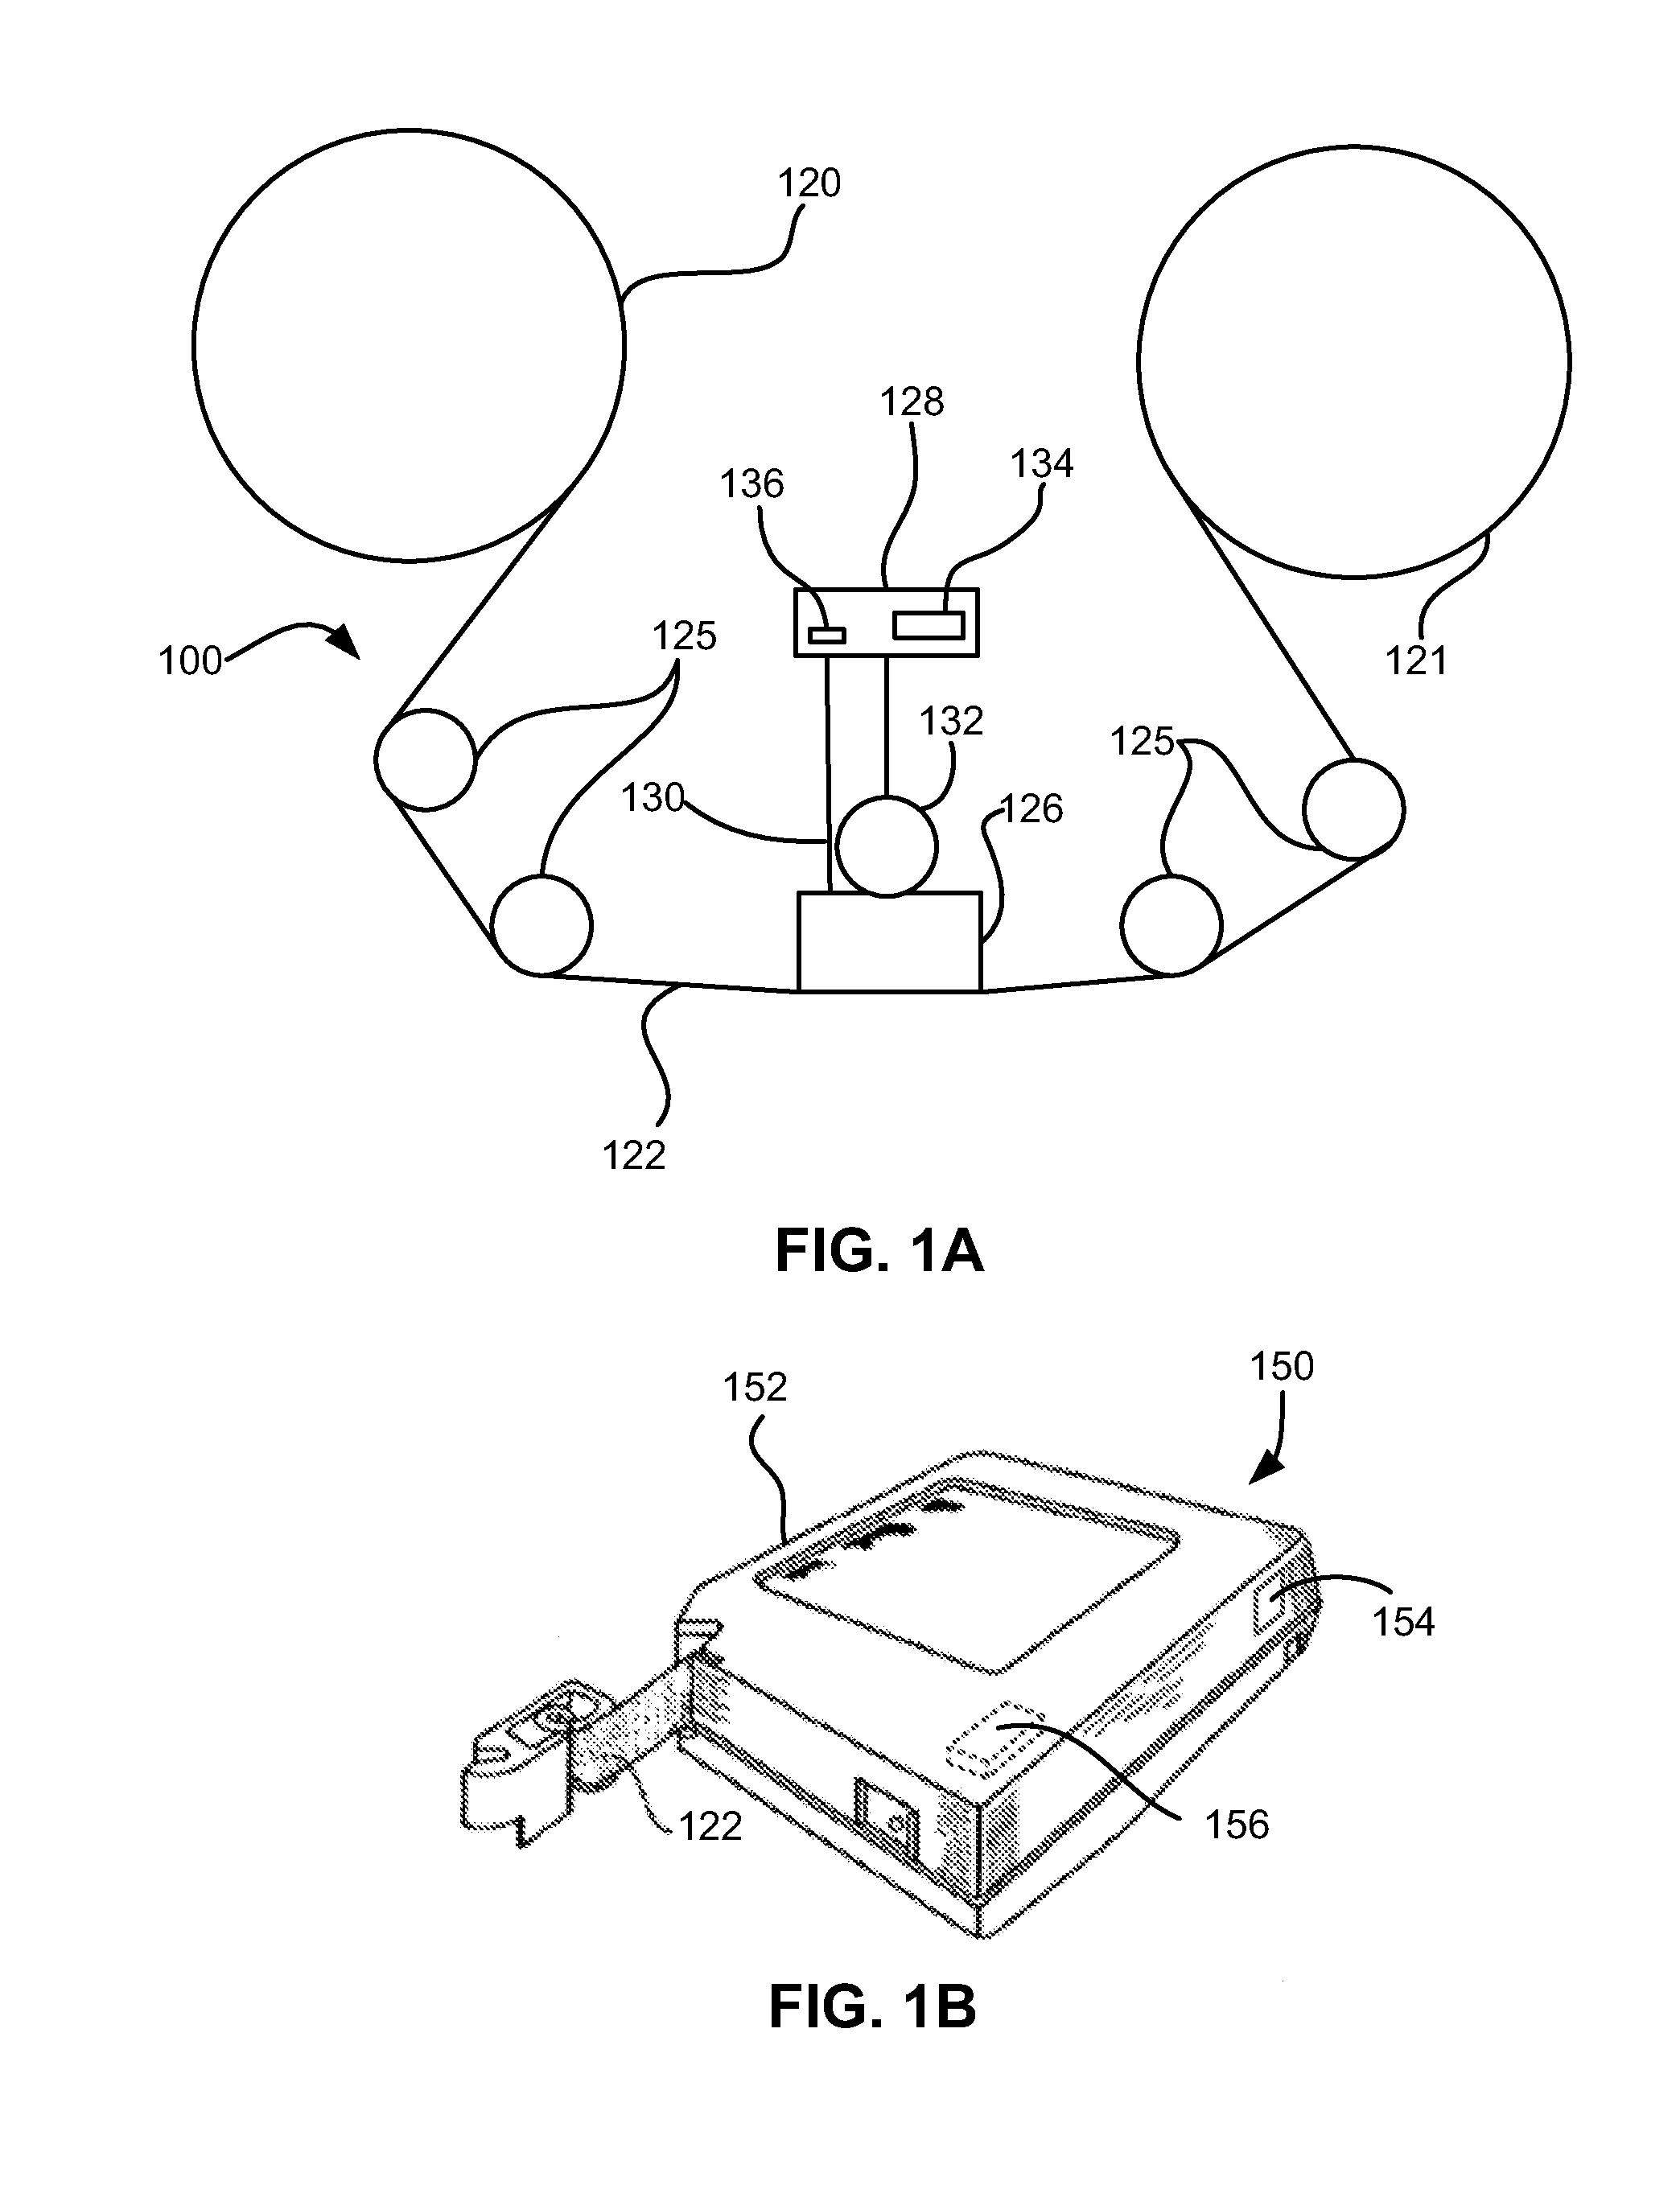 Quasi-statically tilted magnetic tape head having backward compatibility